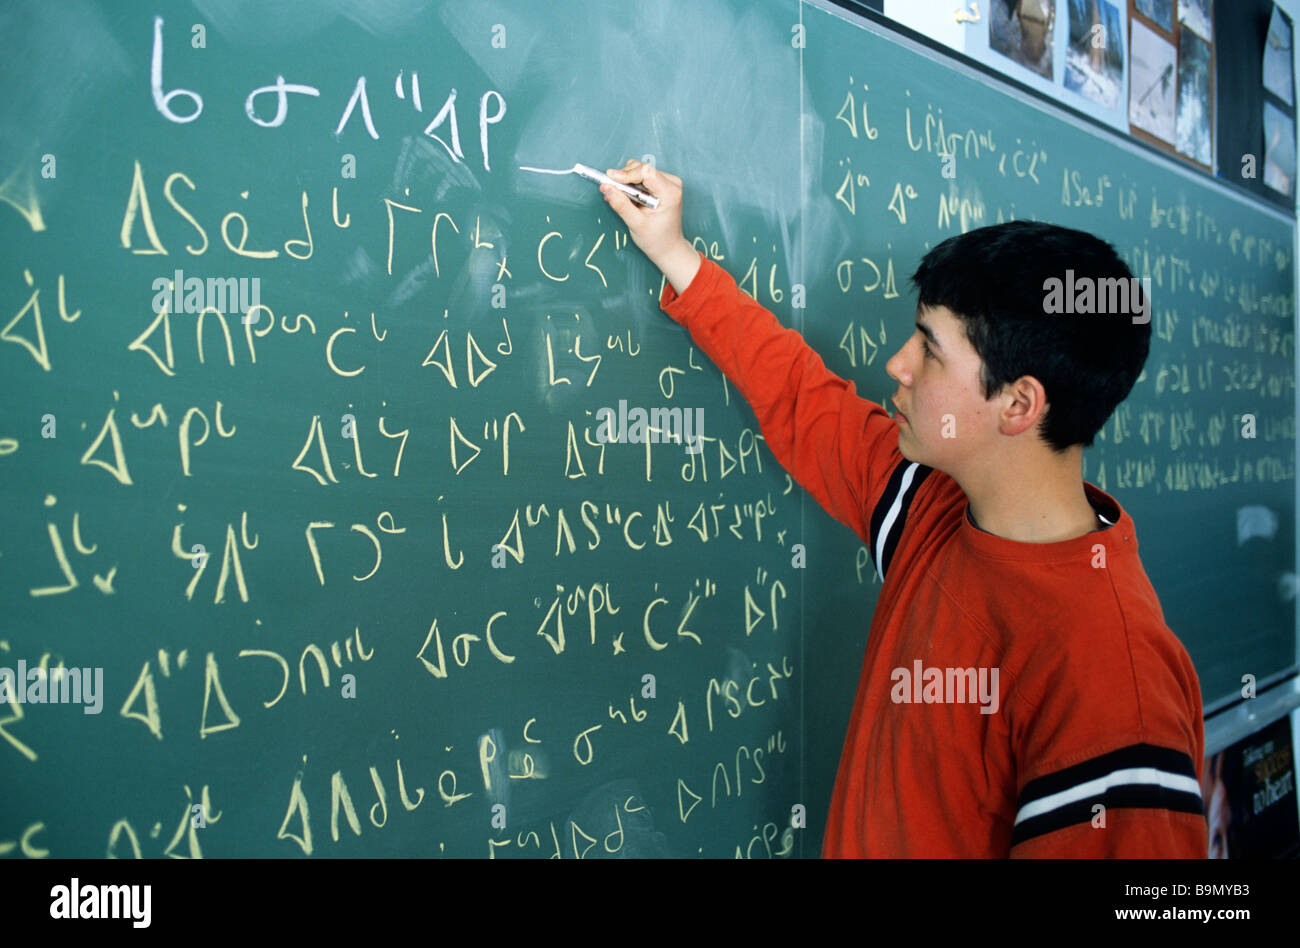 Canada, Quebec Province, James Bay, Chisasibi village, Jérémy Dow writing in Cree on the blackboard, The Cree language is an Stock Photo